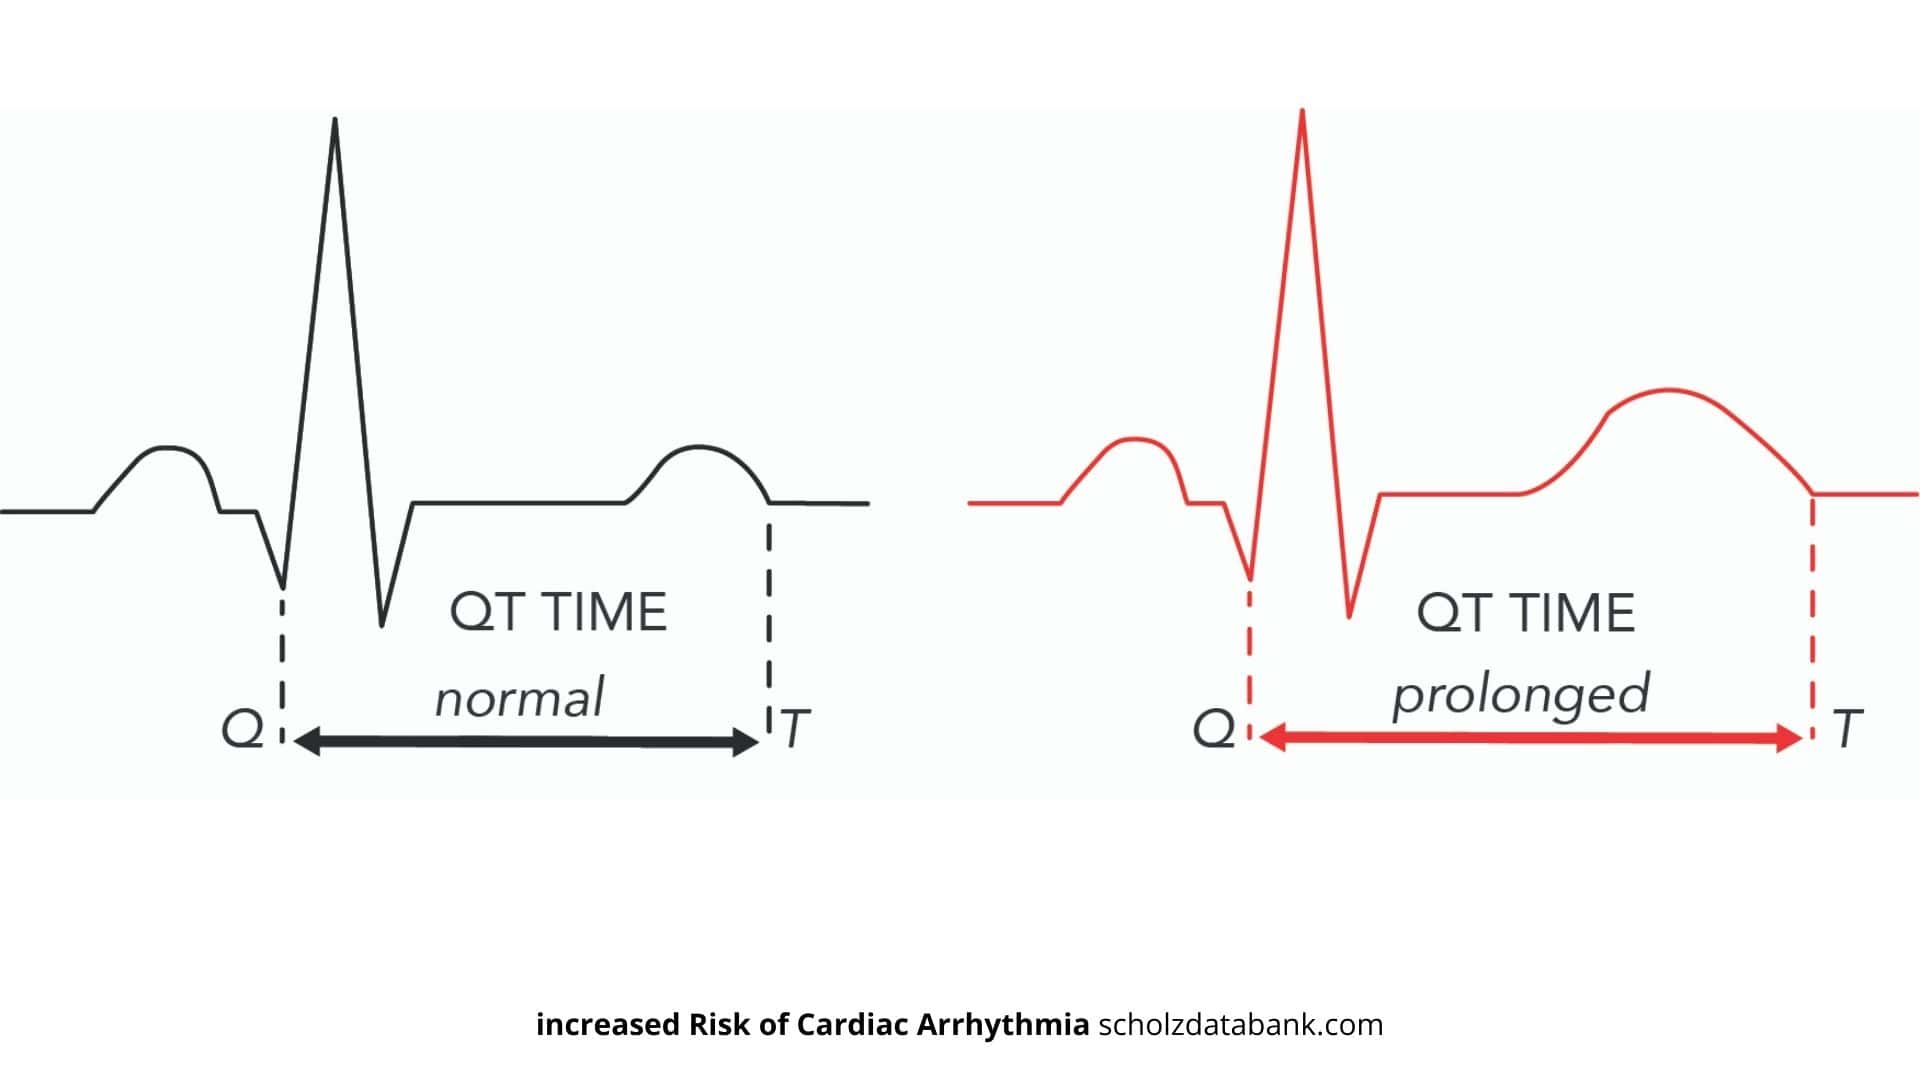 Roughly 10% of Drugs may contribute to increased Risk of Cardiac Arrhythmia due to QT Prolongation